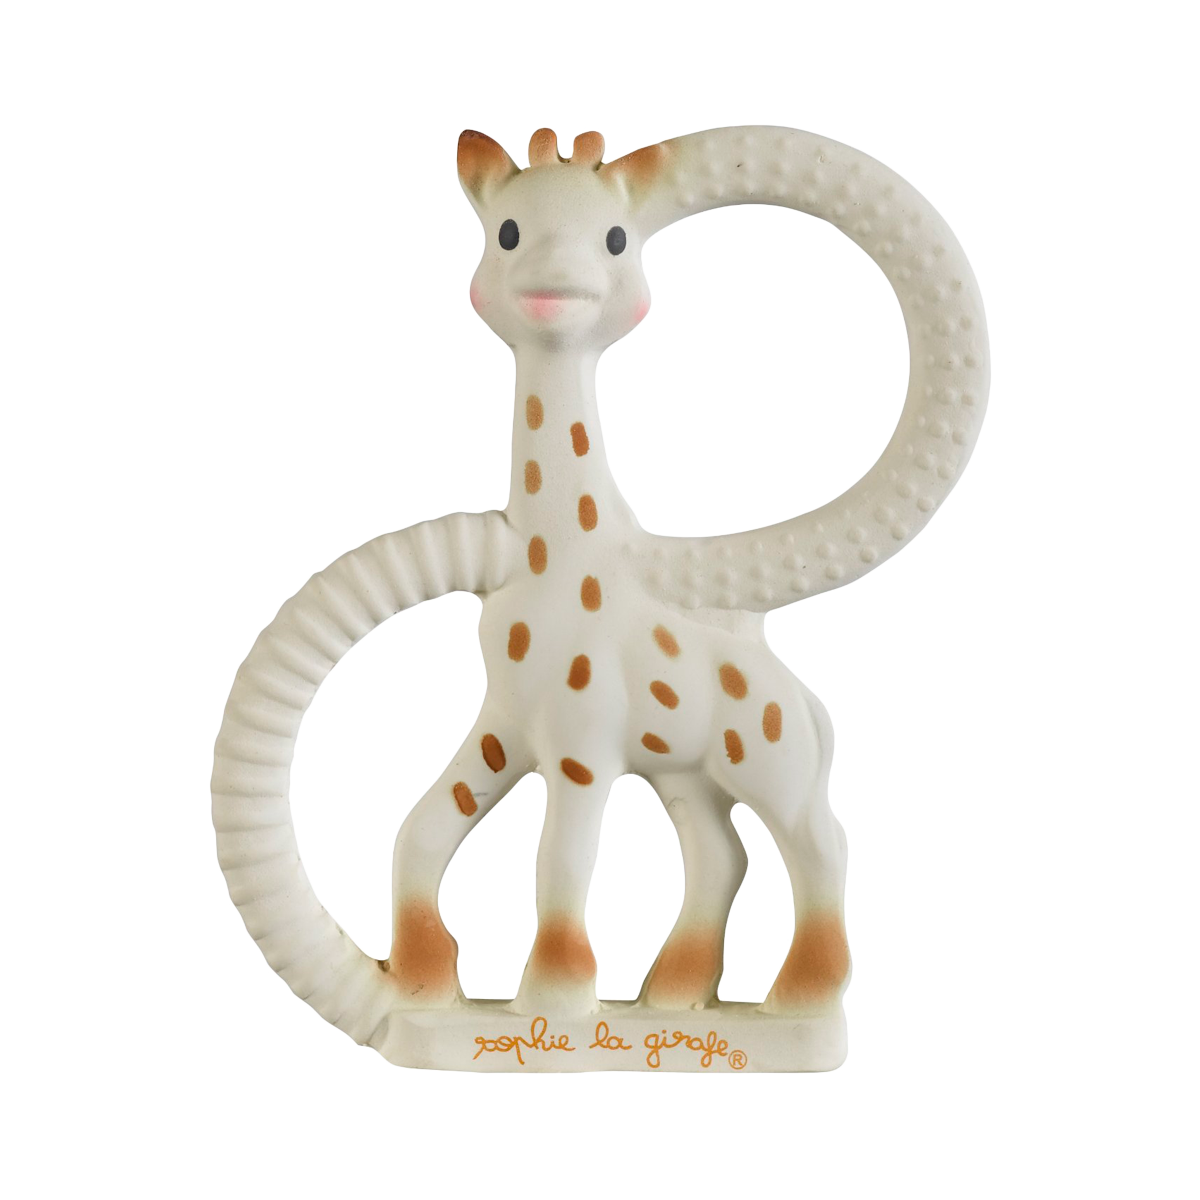 Sophie The Giraffe La Baby Natural Rubber Teether Pacifier Squeaker Vulli Opened 